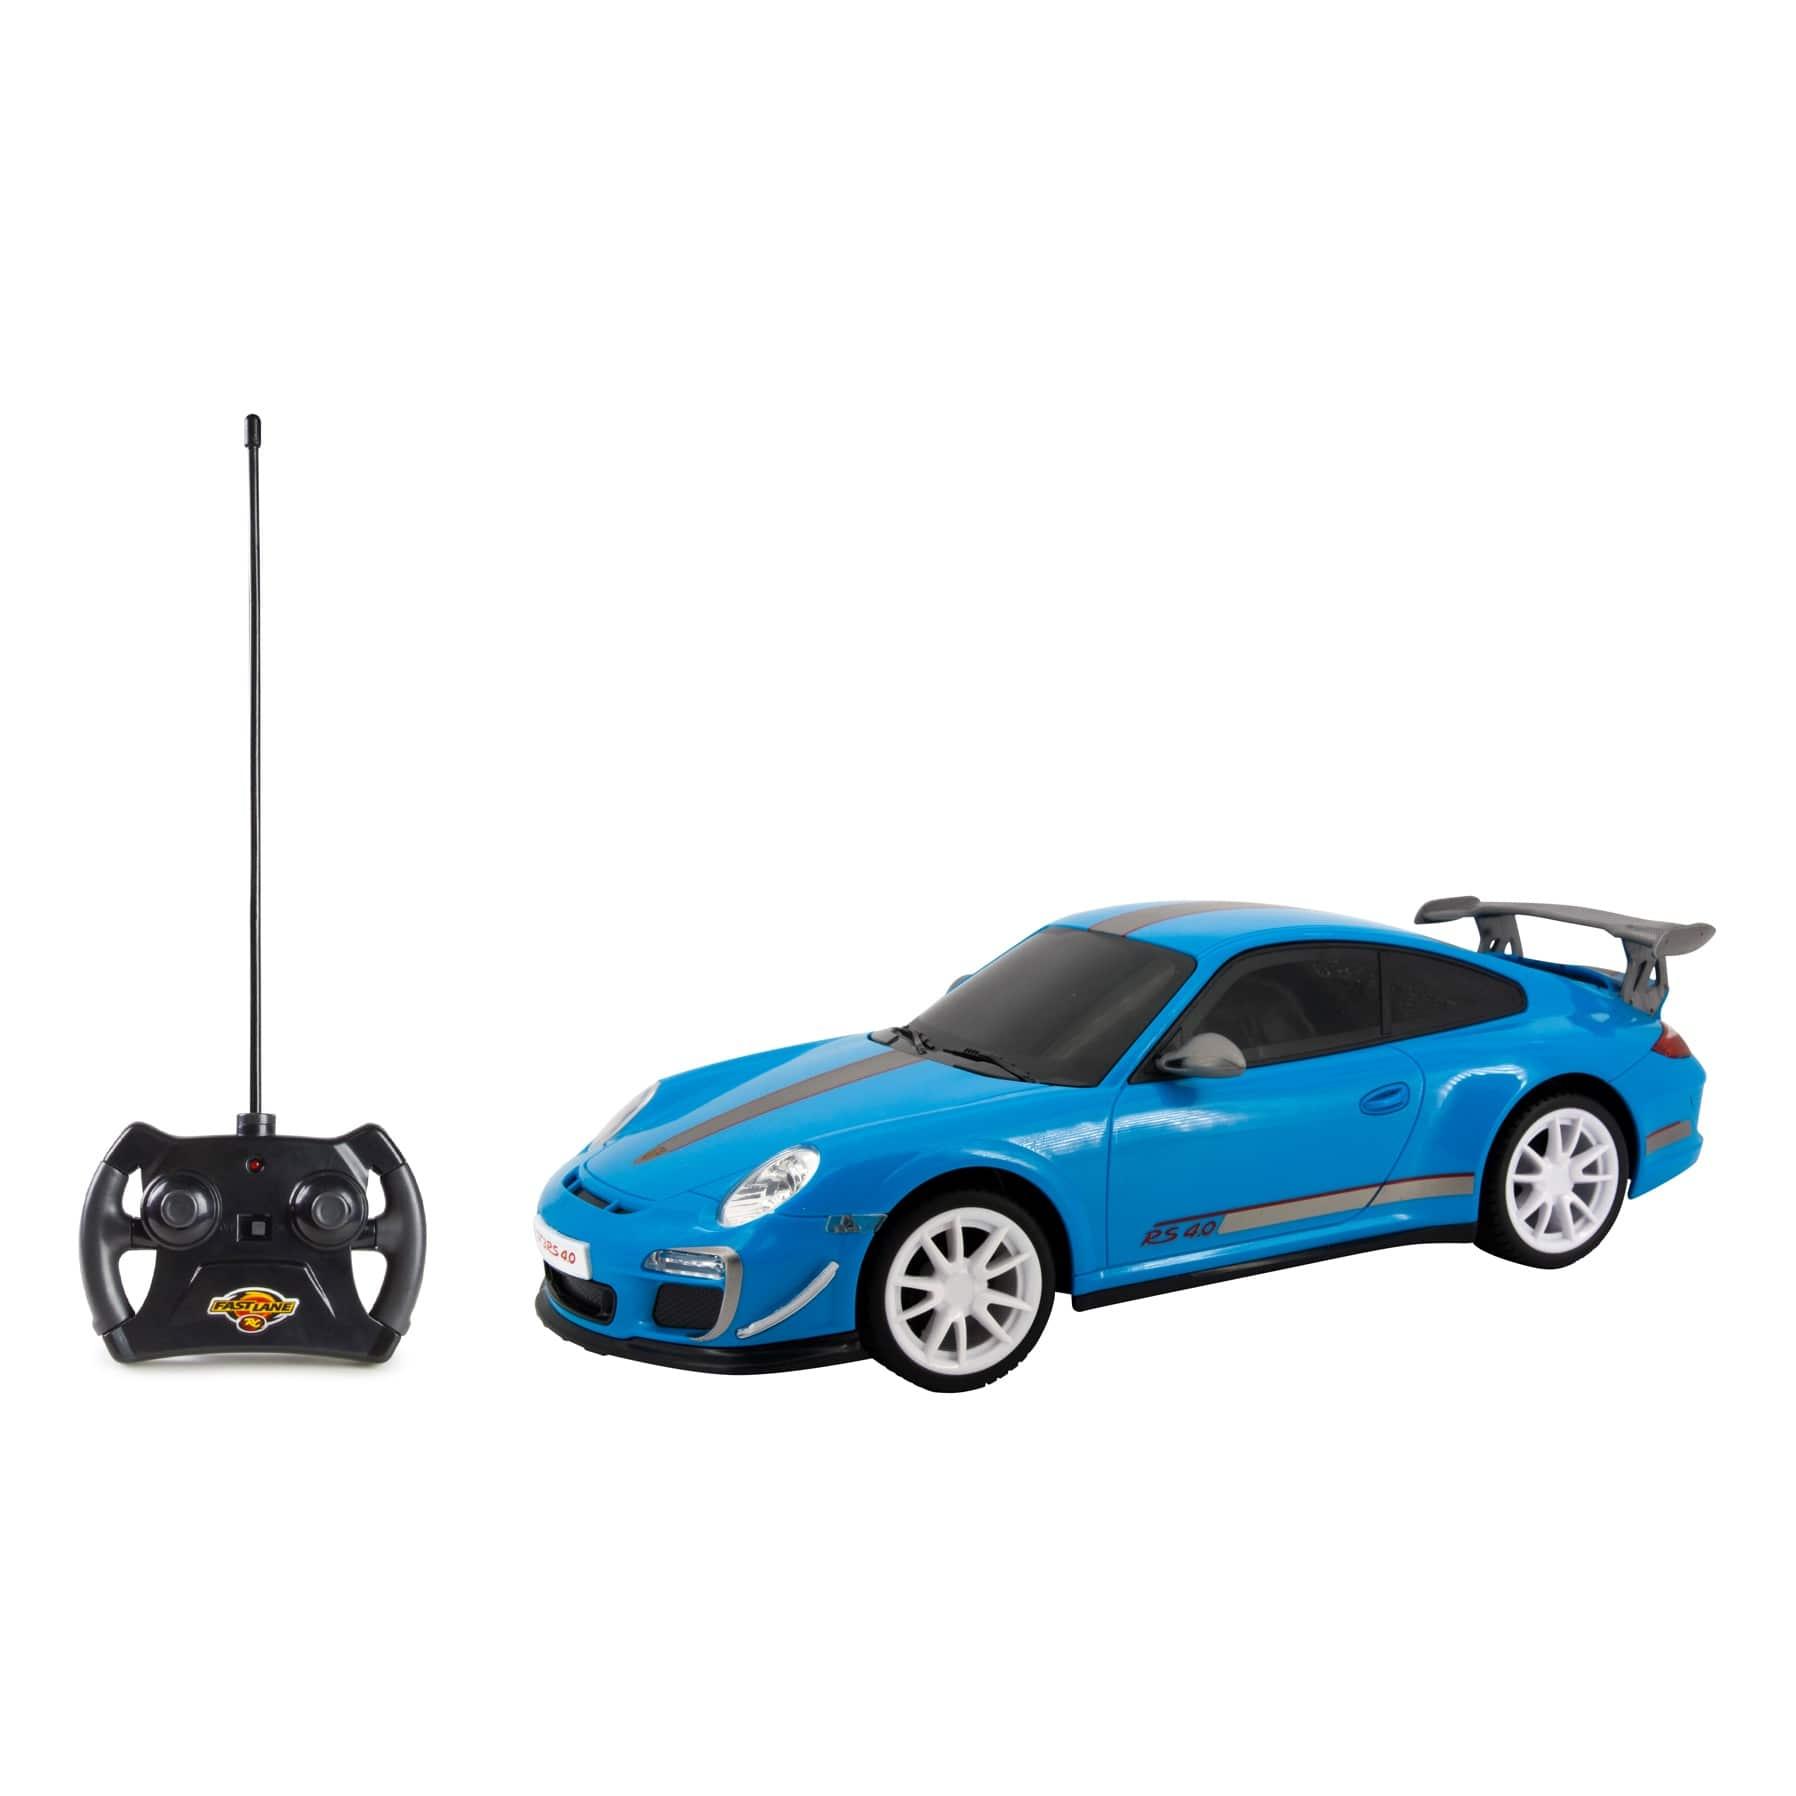 Fast Lane Rc Car:   Tips for Driving a Fast Lane RC Car